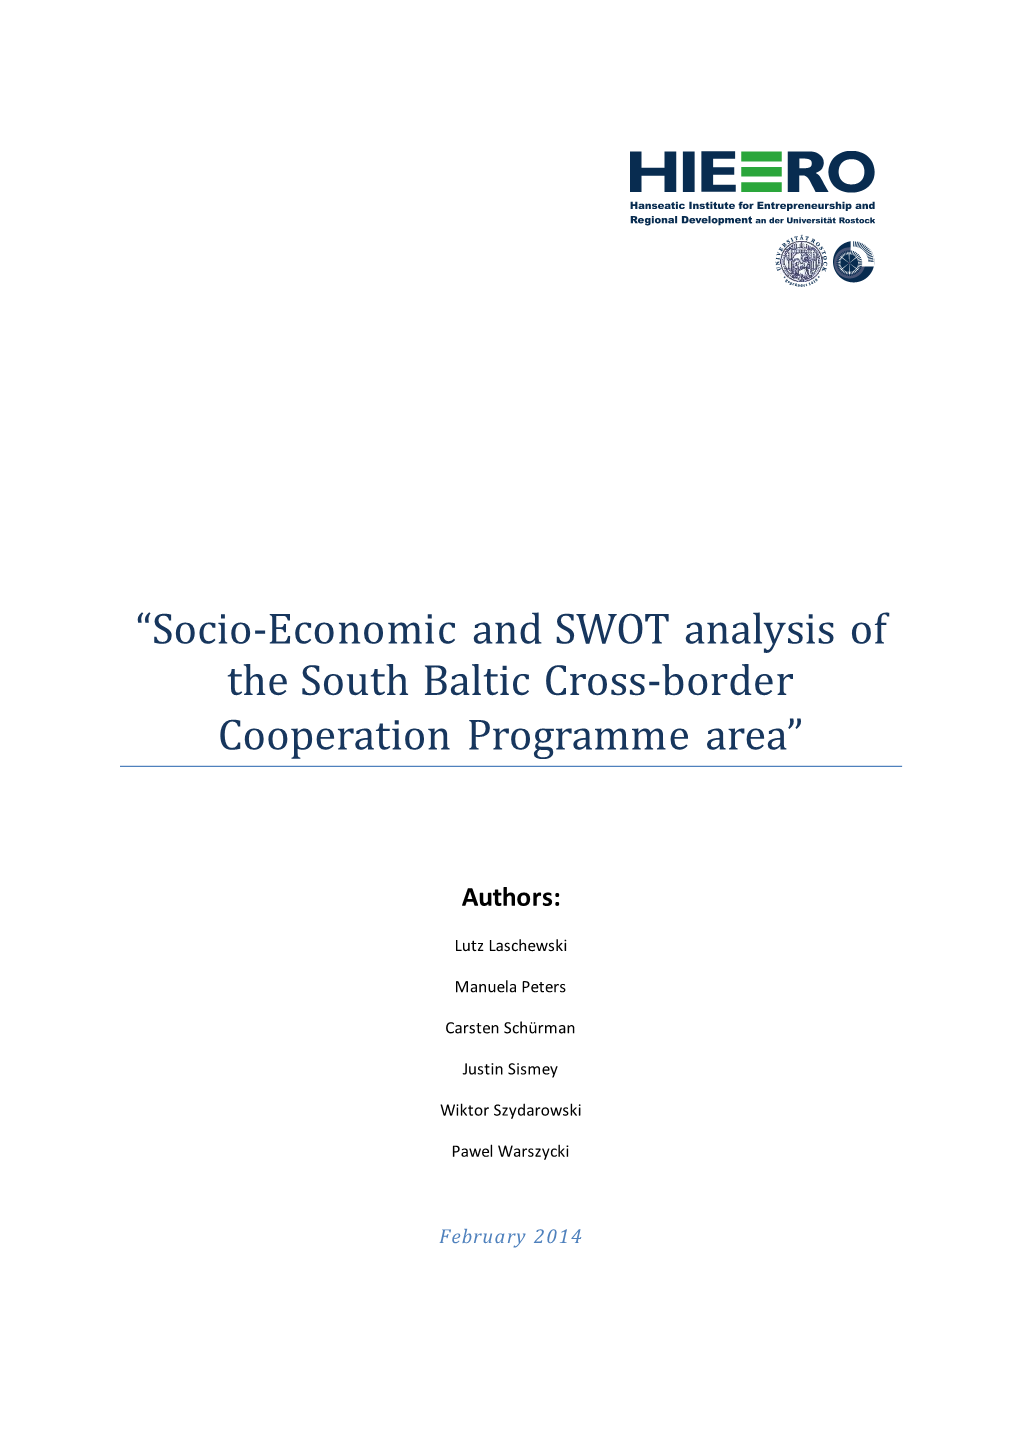 “Socio-Economic and SWOT Analysis of the South Baltic Cross-Border Cooperation Programme Area”